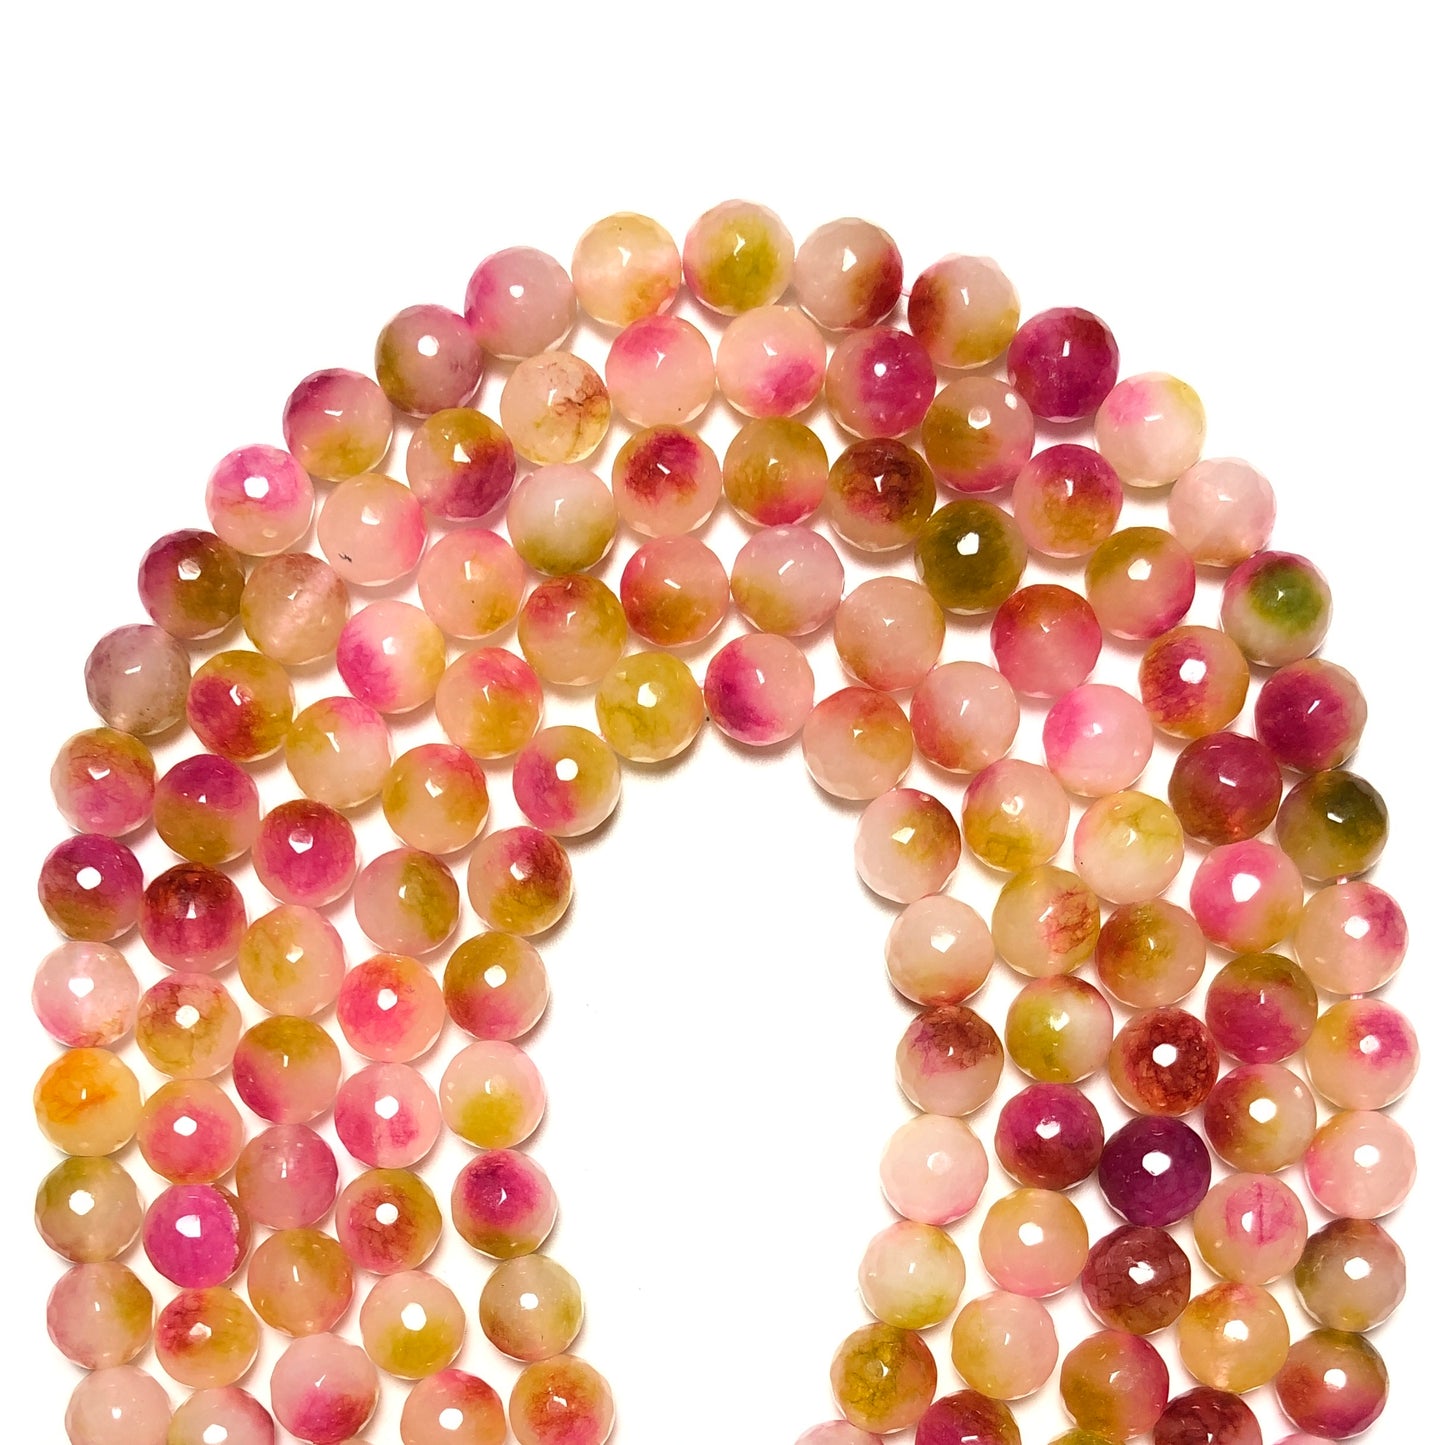 2 Strands/lot 10mm Fuchsia Pink Green Faceted Jade Stone Beads Stone Beads Faceted Jade Beads New Beads Arrivals Charms Beads Beyond